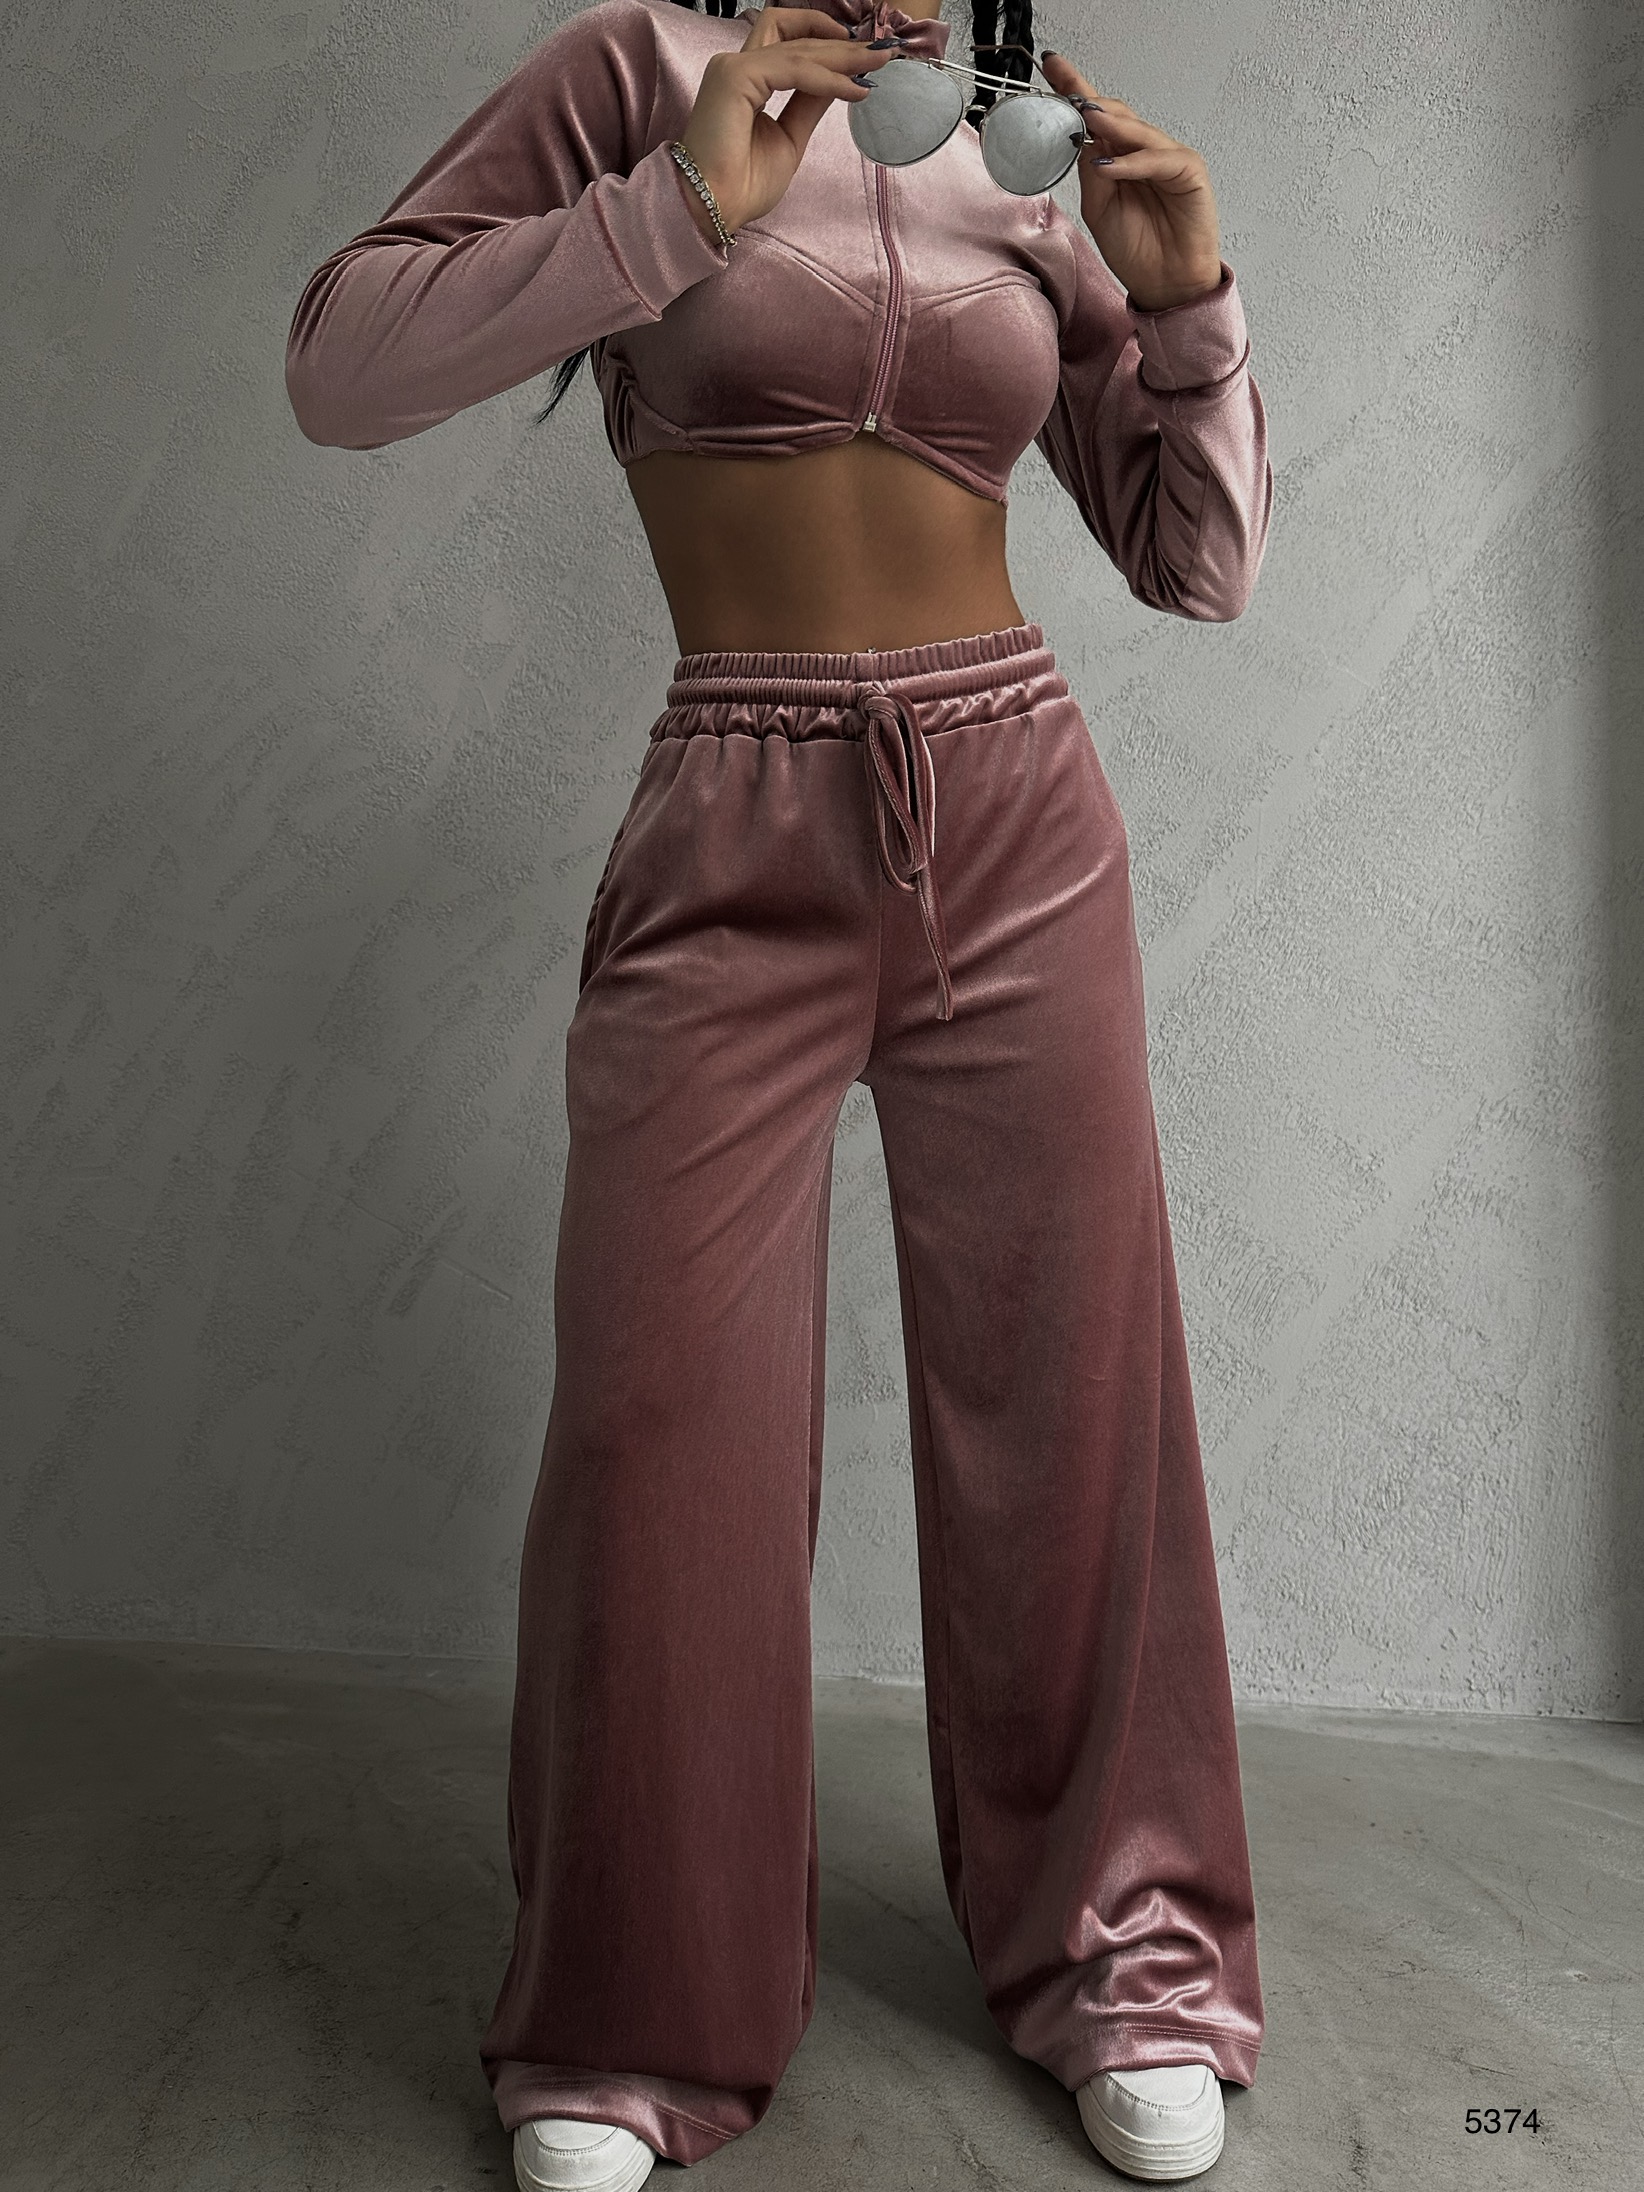 A wholesale clothing model wears Tracksuit - Pink, Turkish wholesale Tracksuit of Black Fashion